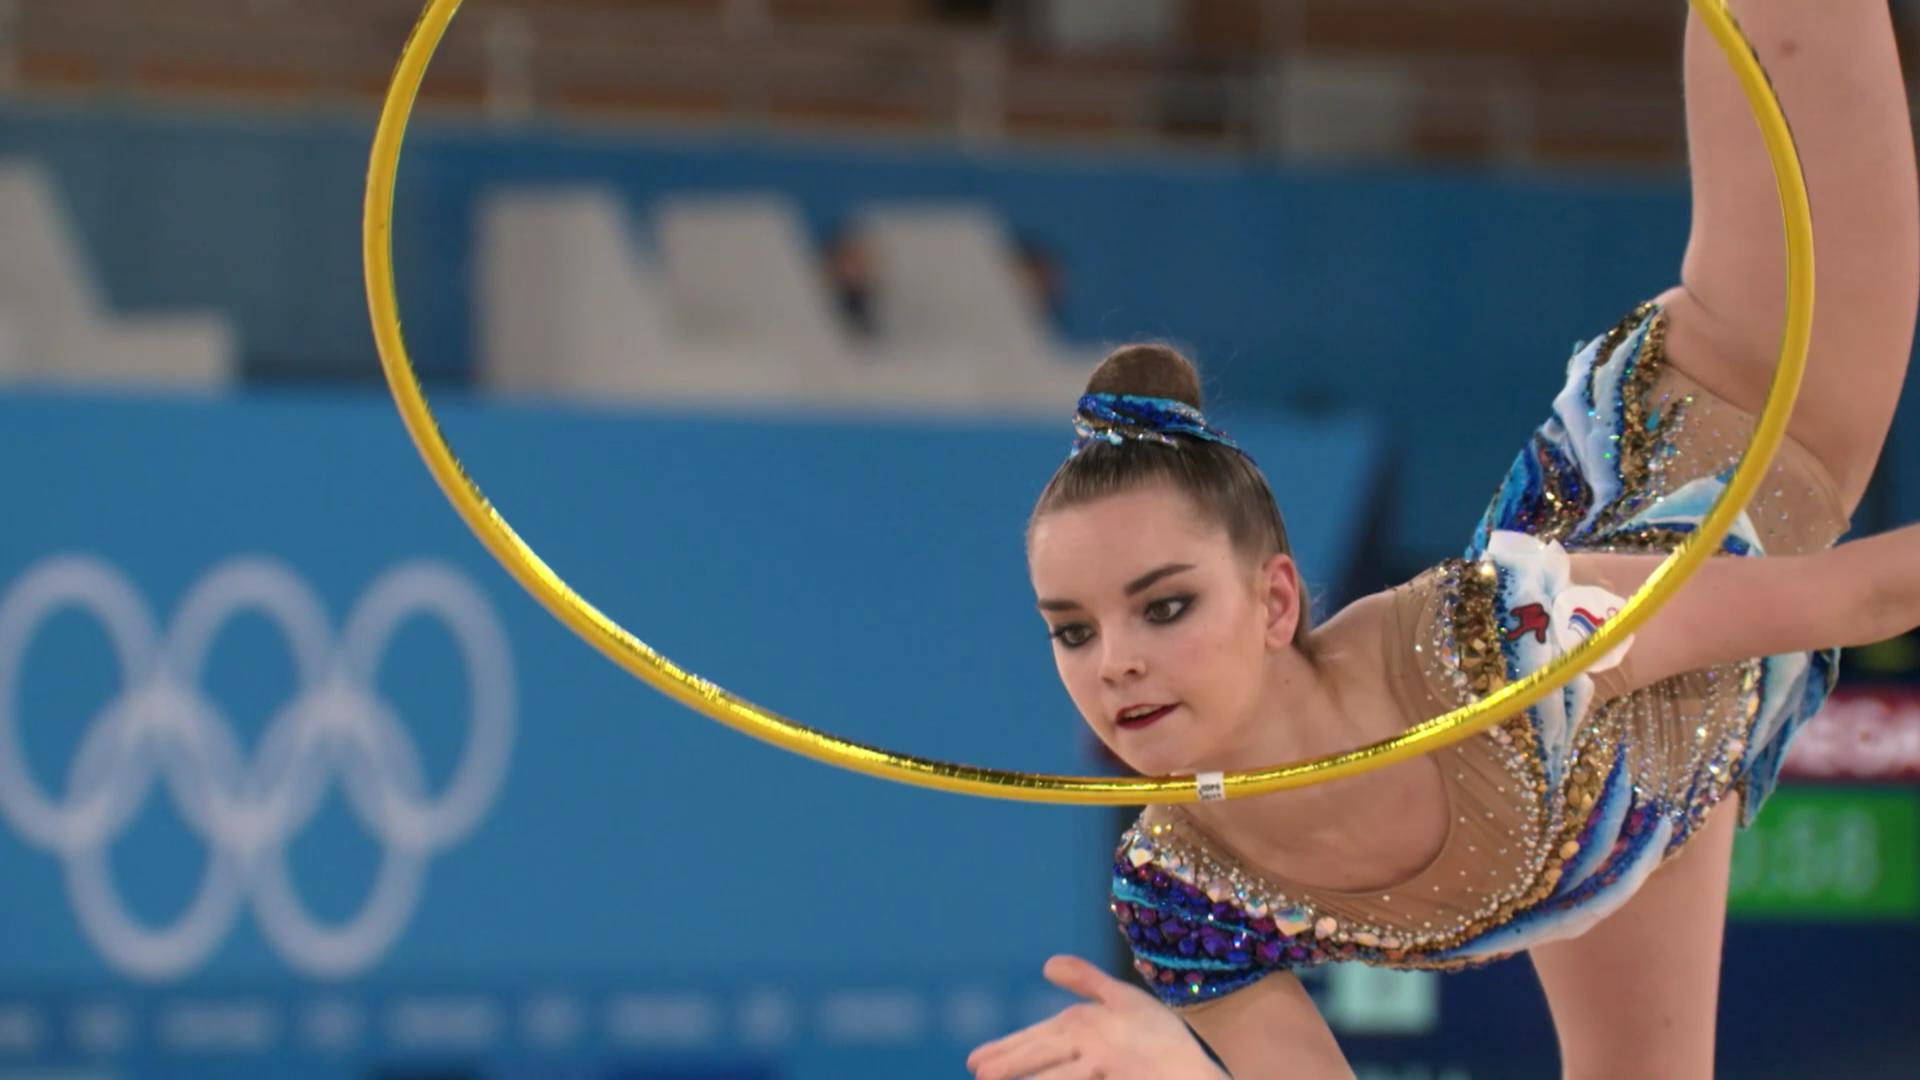 How to qualify for rhythmic gymnastics at Paris 2024. The Olympics  qualification system explained